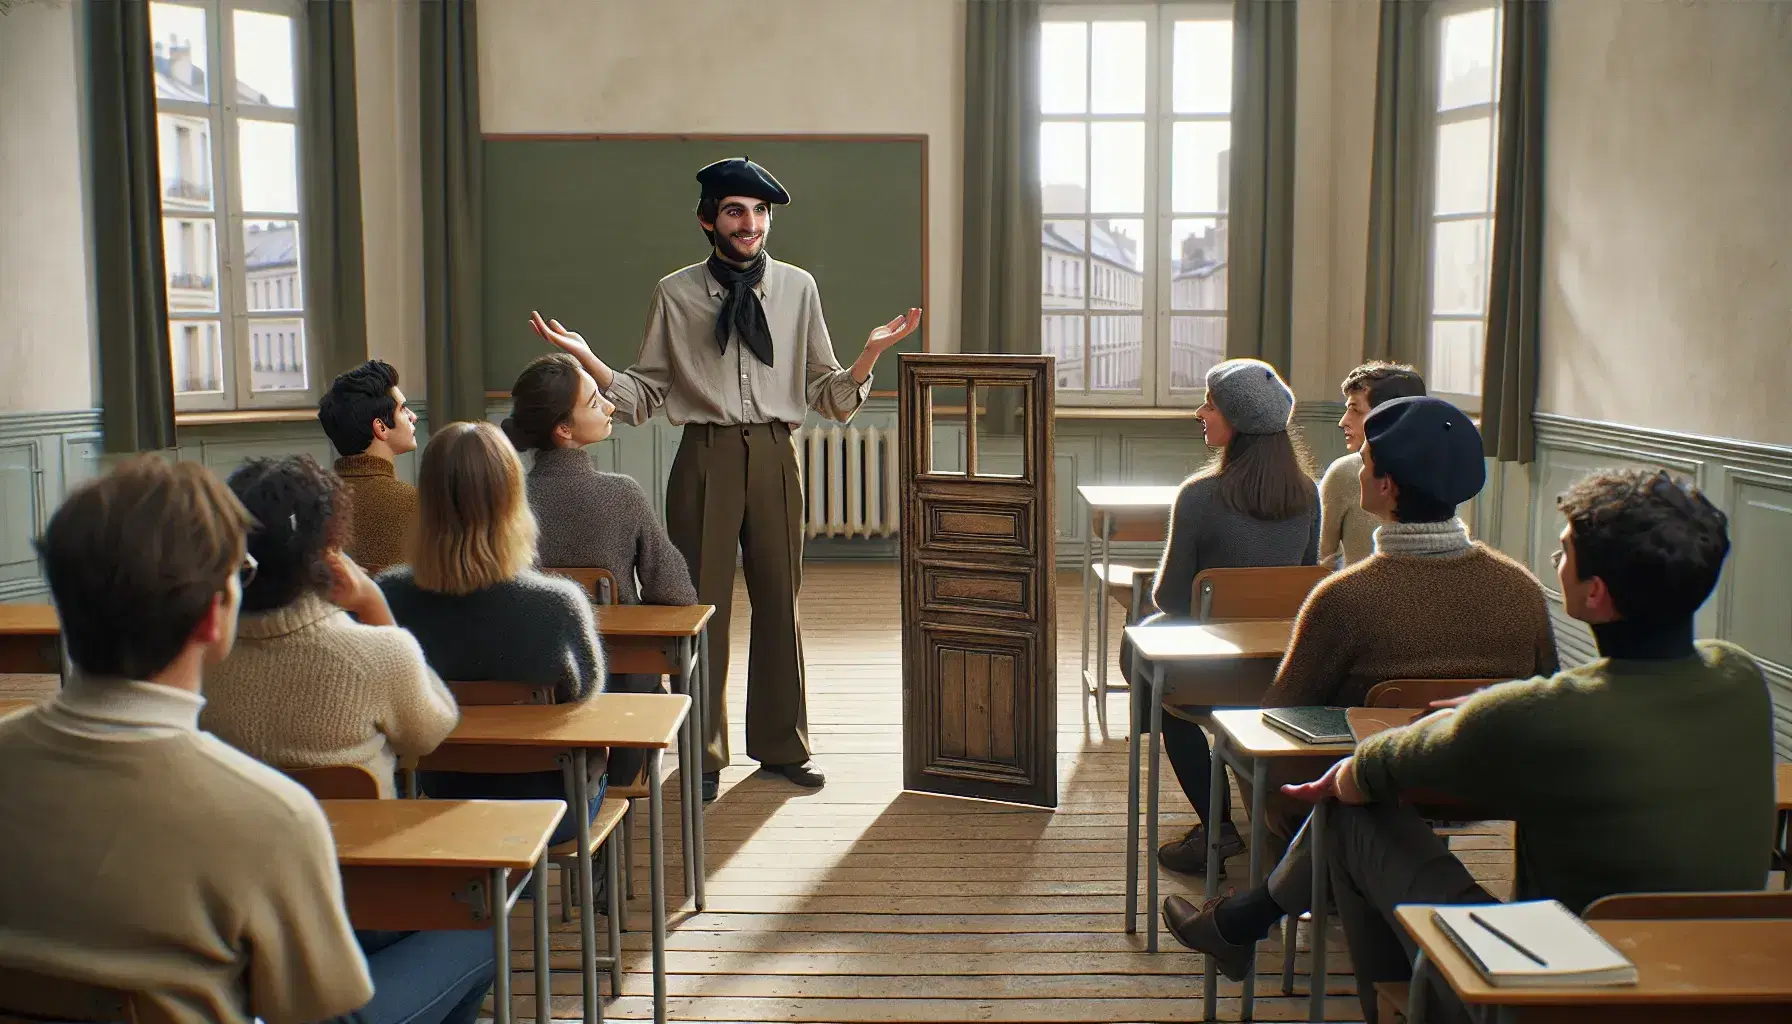 Diverse group of students in a classroom engaging with a teacher beside a wooden door prop, one in a beret participates in role-play.